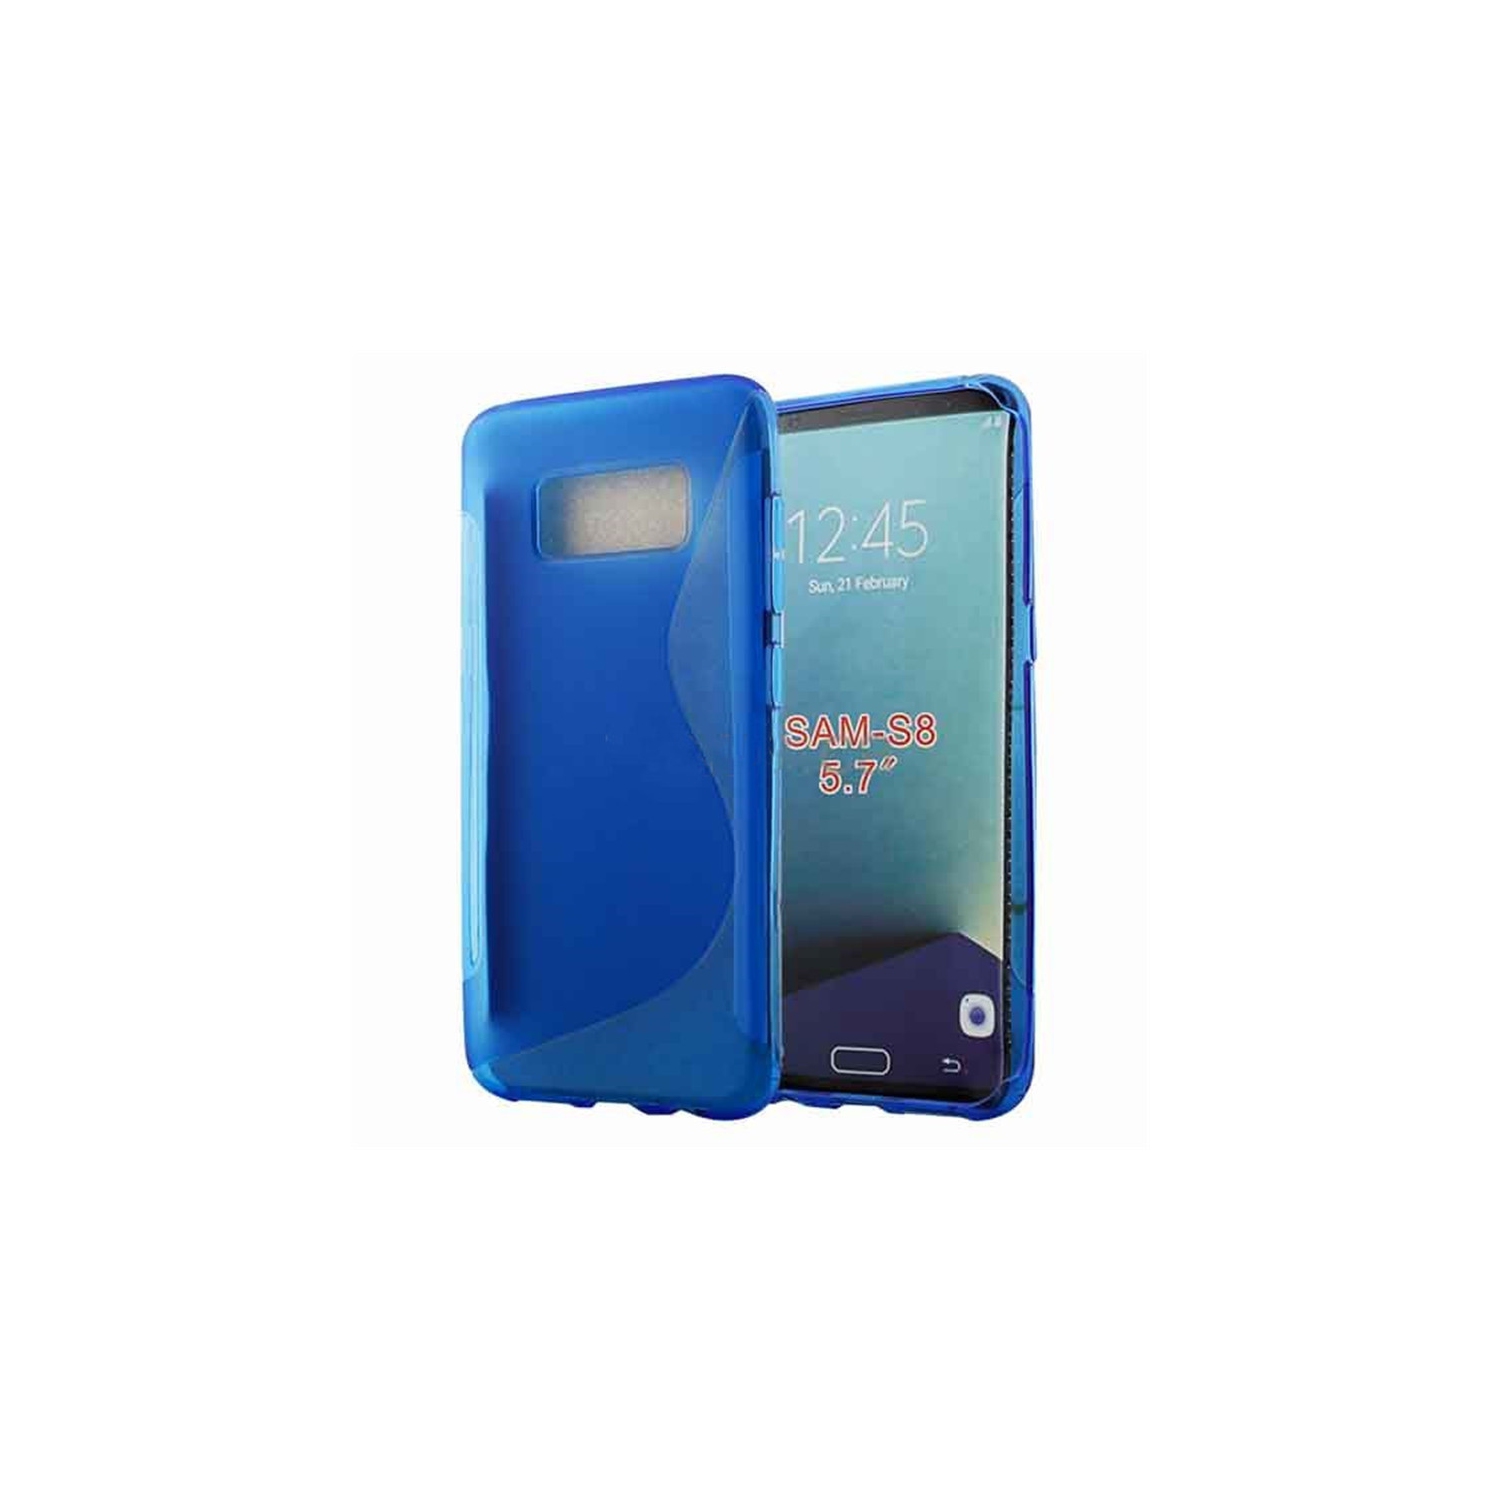 【CSmart】 Ultra Thin Soft TPU Silicone Jelly Bumper Back Cover Case for Samsung Galaxy S8, Blue